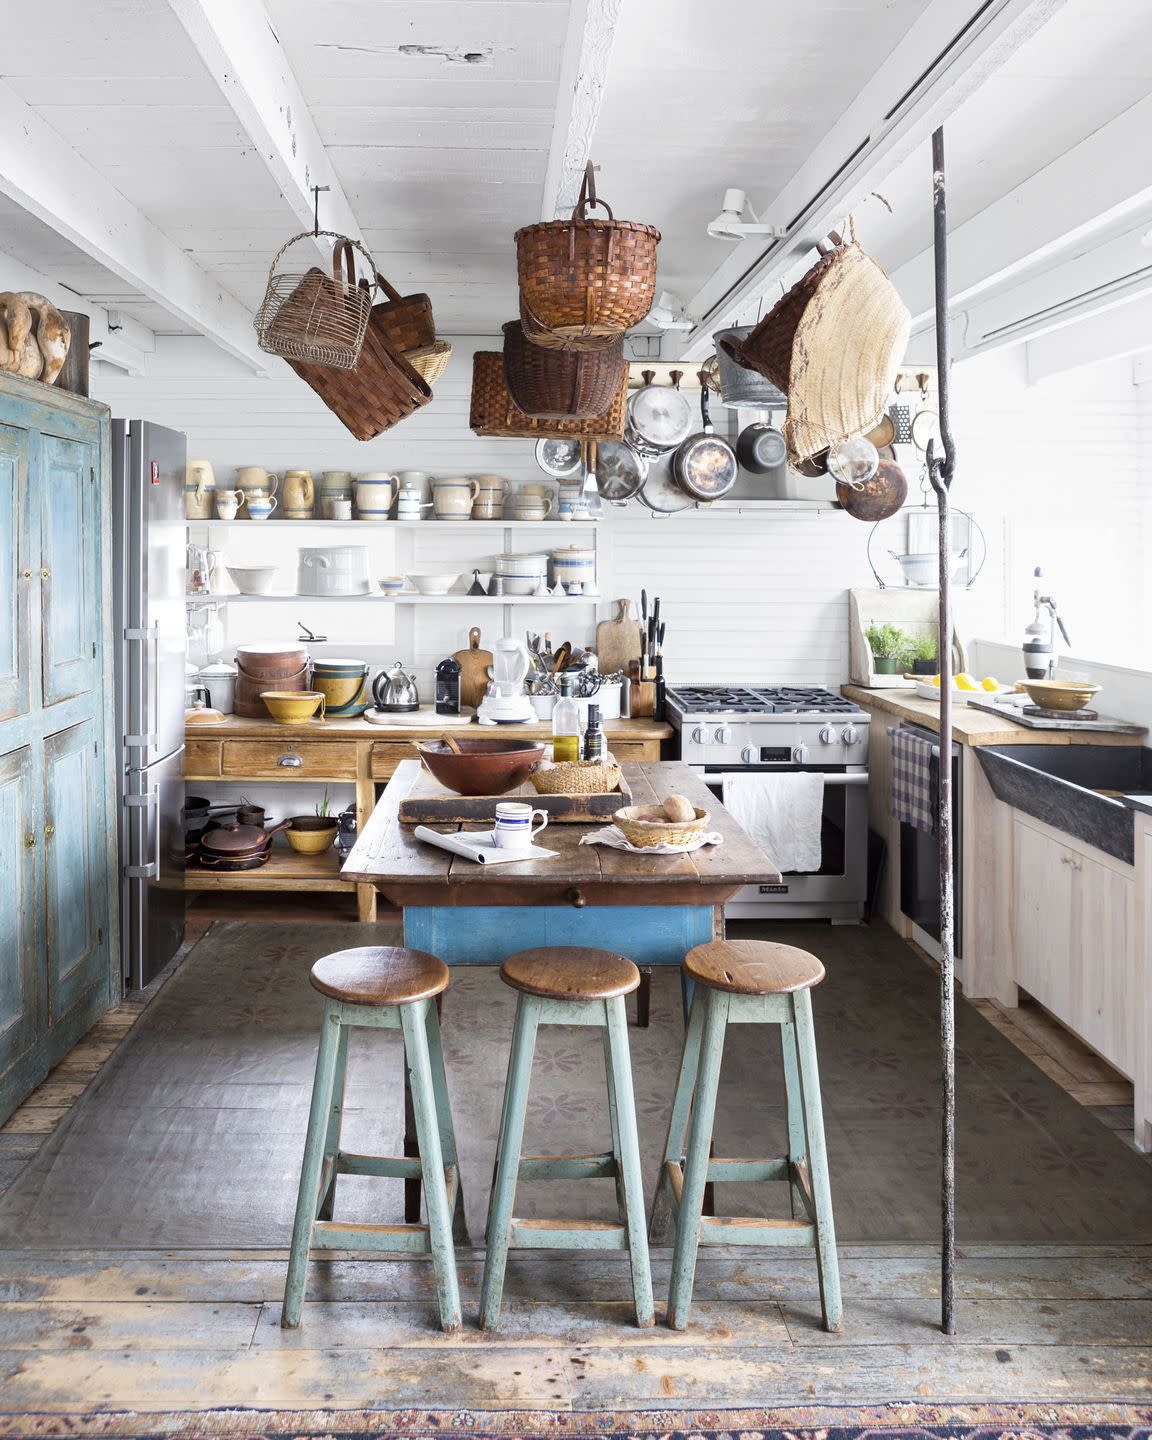 in a farmhouse kitchen baskets and cooking pots hang from the ceiling for a creative storage solution